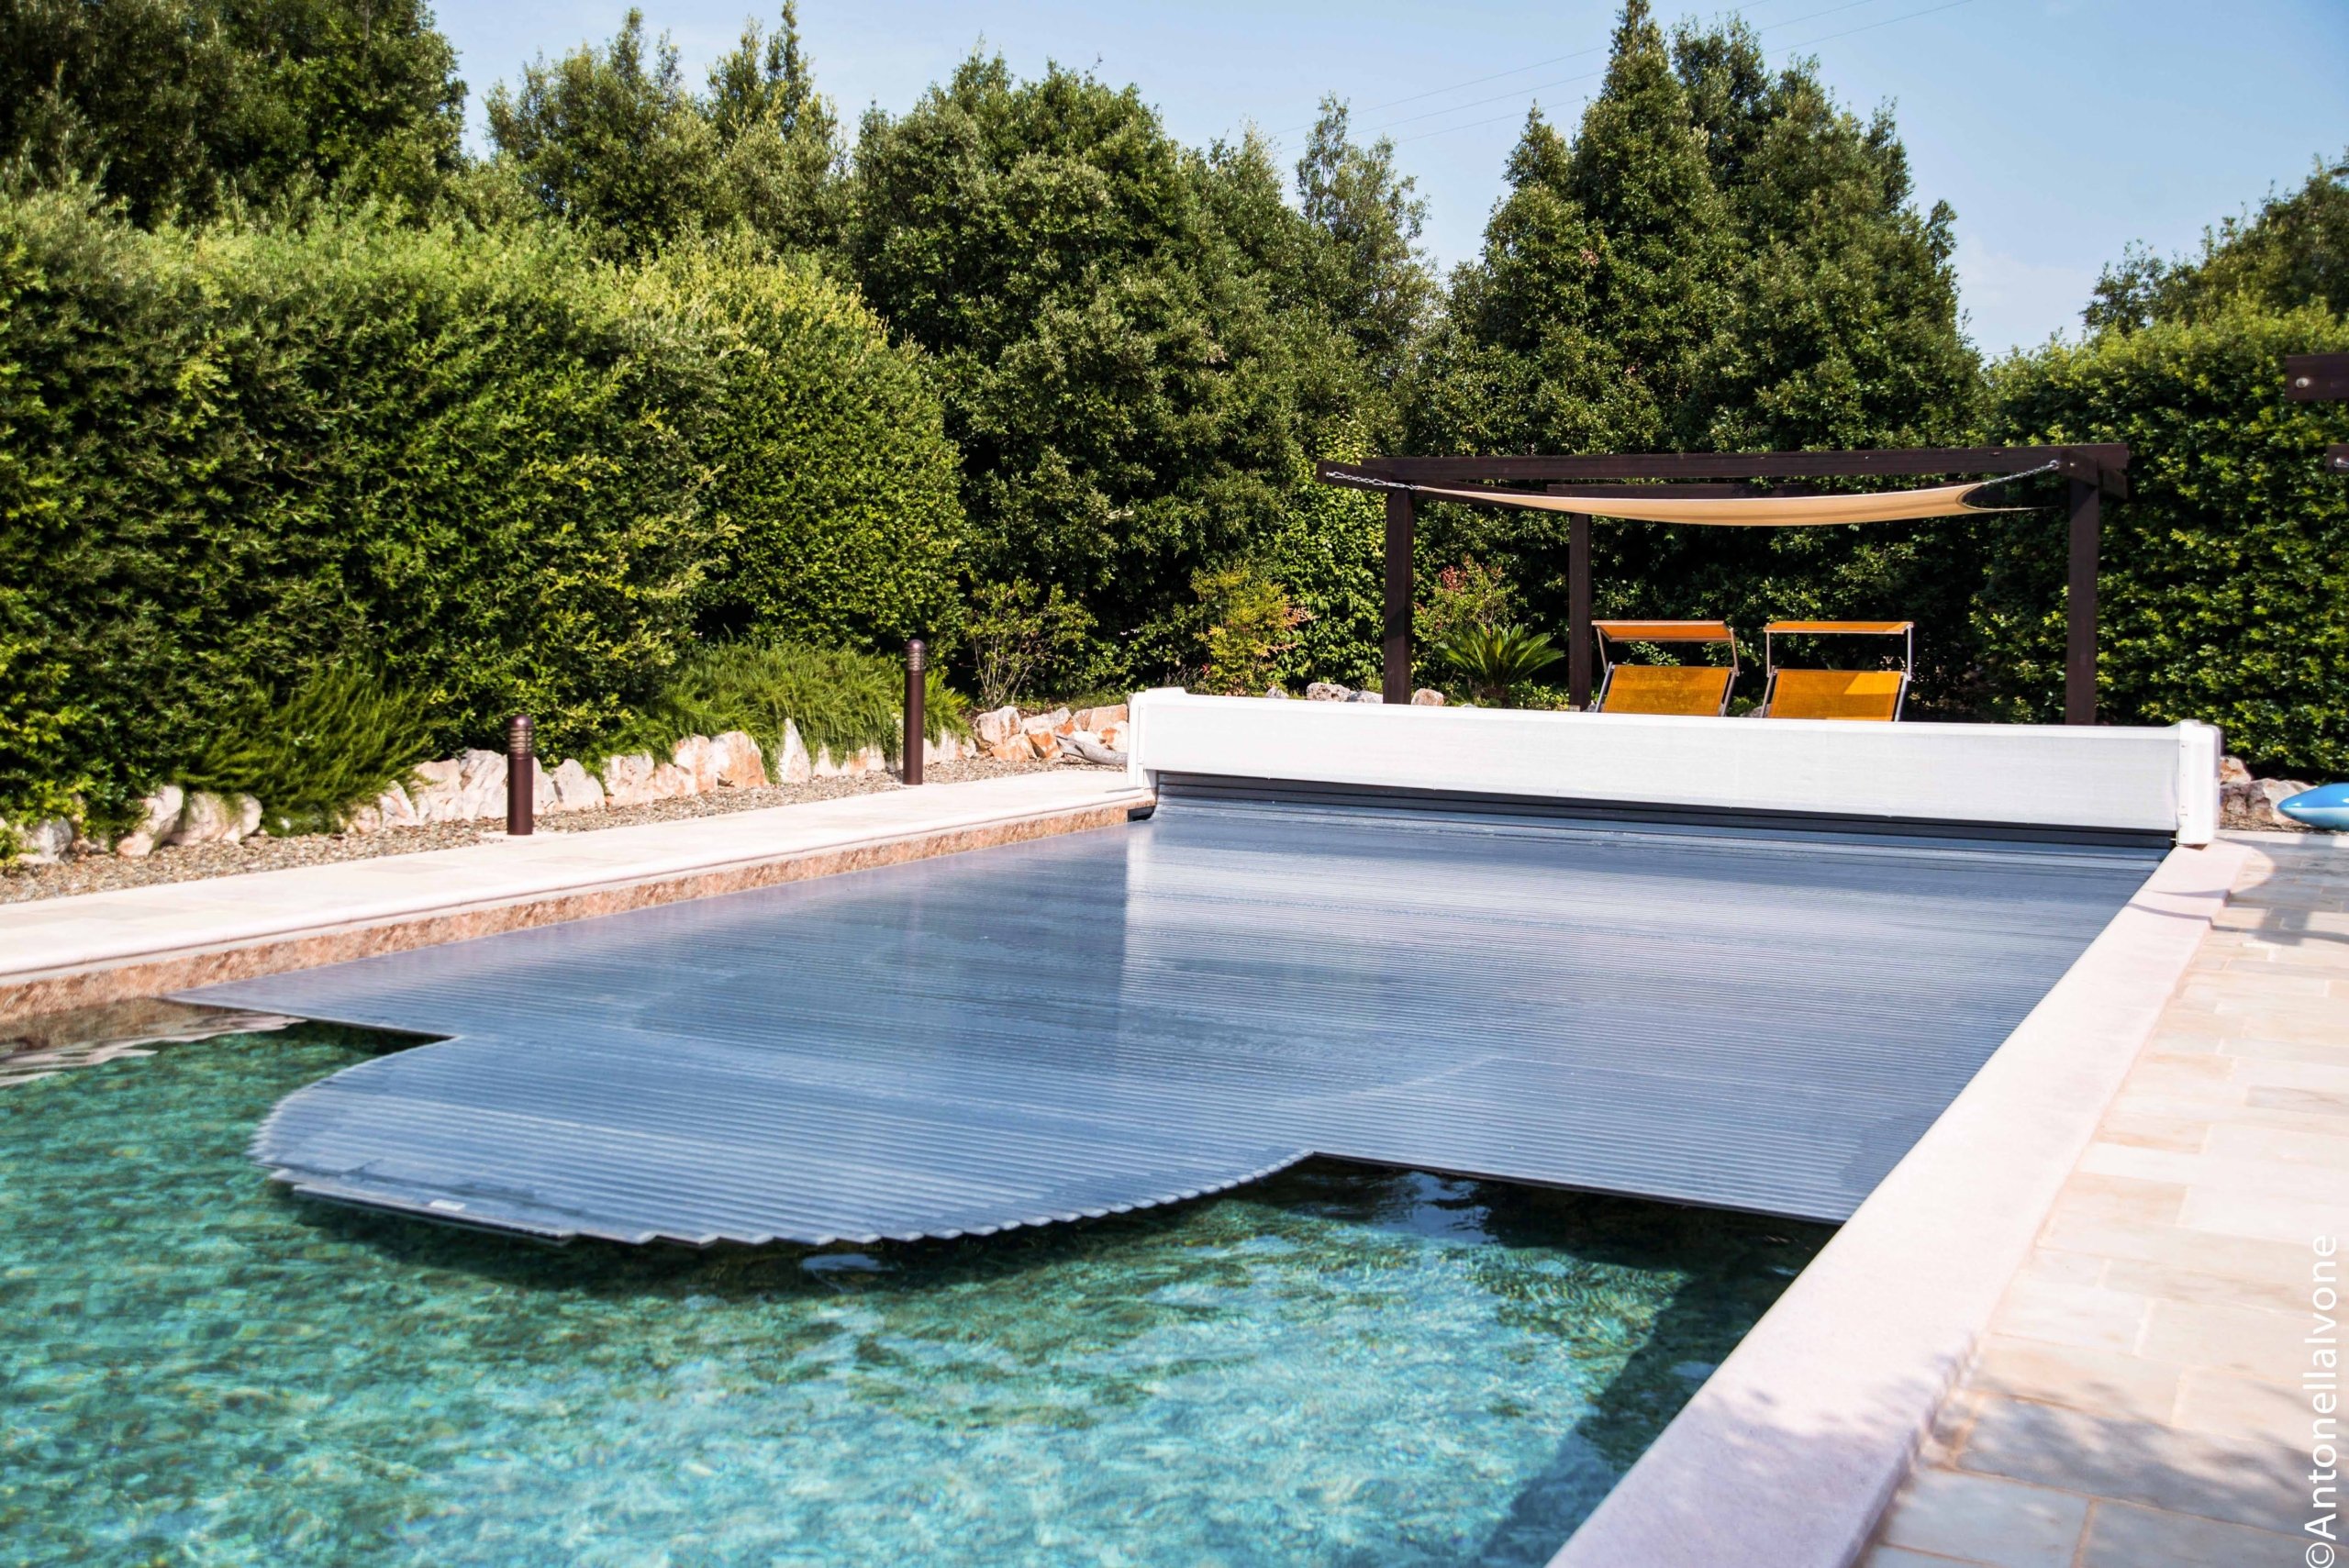 Swimming pool cover to maintain desired temperature.